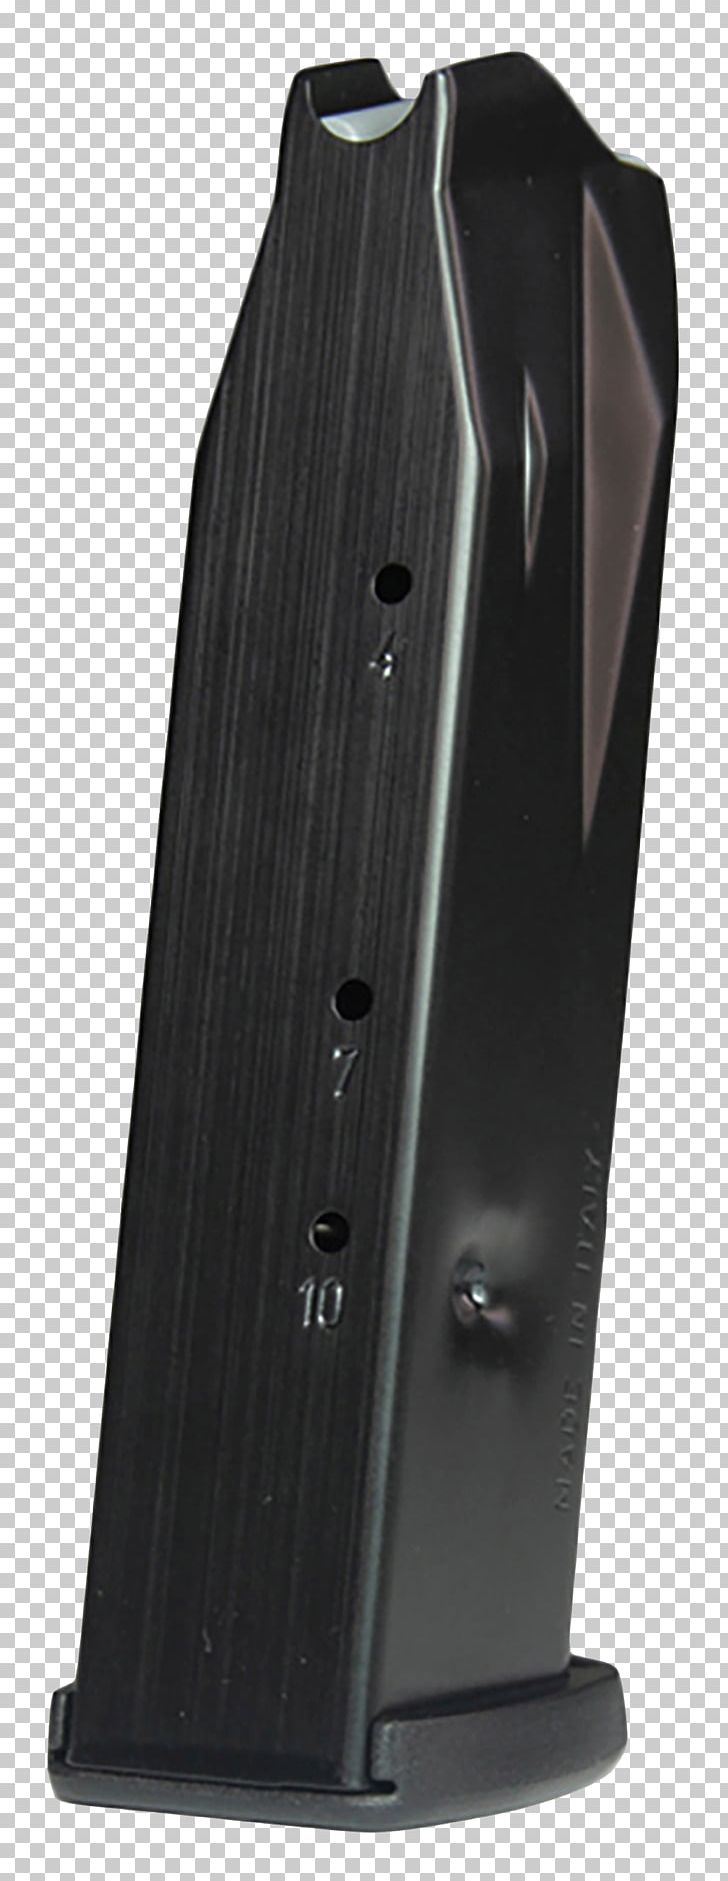 Walther PPQ Walther Arms 2810090 PPQ M2 45 ACP 10 RD Black Finish Carl Walther GmbH Magazine Computer Speakers PNG, Clipart, 45 Acp, Audio, Audio Equipment, Carl Walther Gmbh, Computer Free PNG Download